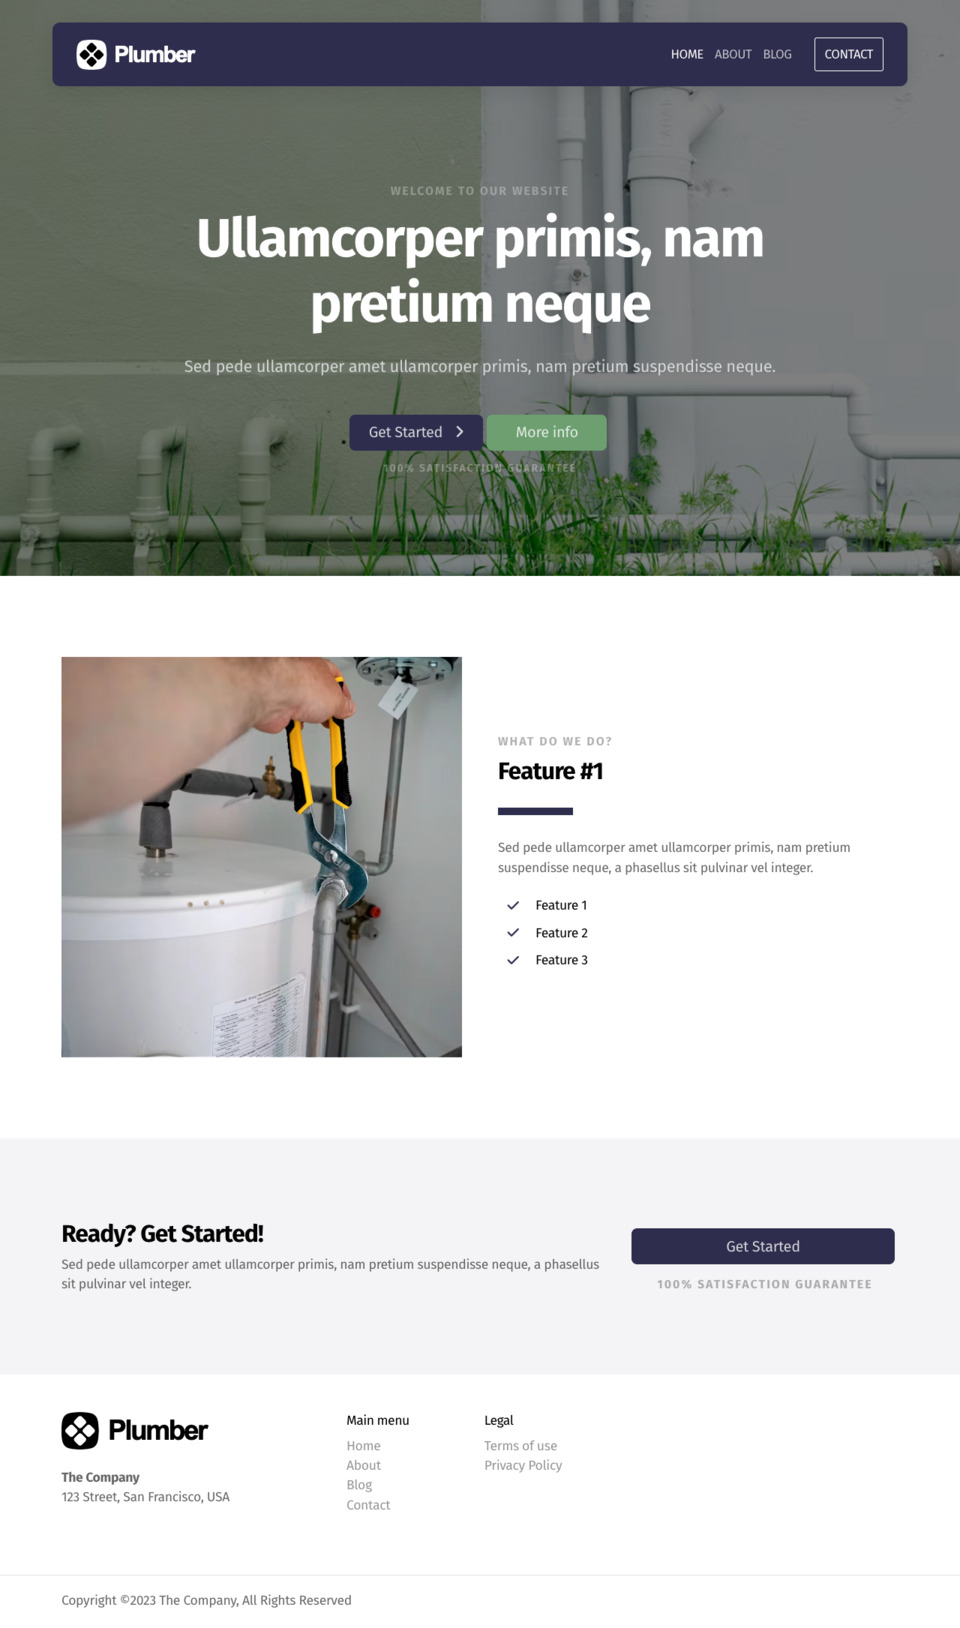 Plumber Website Template - Ideal for plumbers, plumbing companies, handymen, and businesses offering plumbing services.